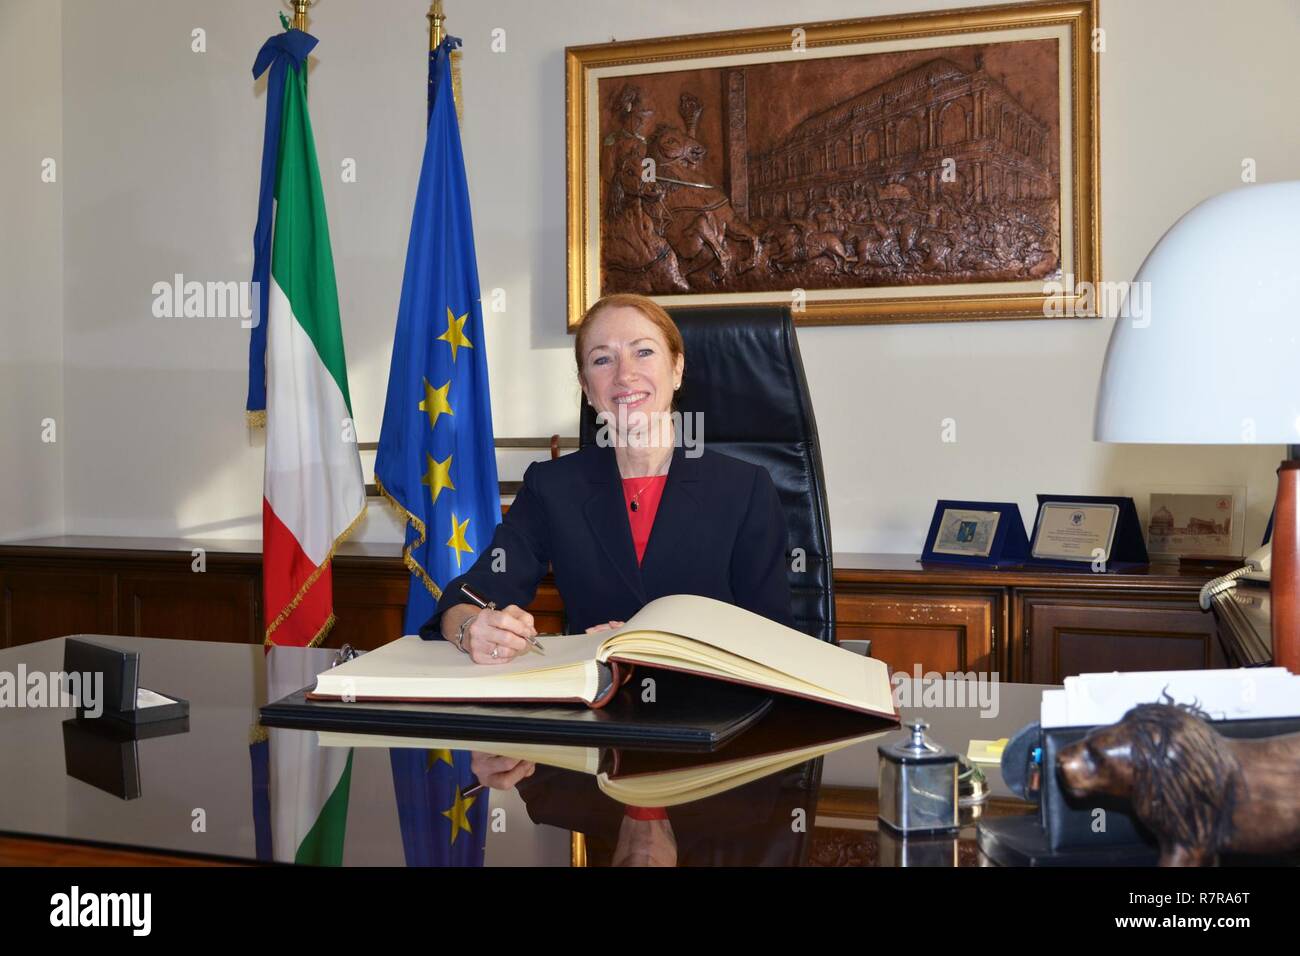 Ms. Kelly Degnan, Charge’ d’Affaires ad interim U.S. Embassy & Consulates Italy, signs the guest of honor book during visit at Center of Excellence for Stability Police Units (CoESPU) Vicenza, Italy, Mar. 30, 2017. Stock Photo